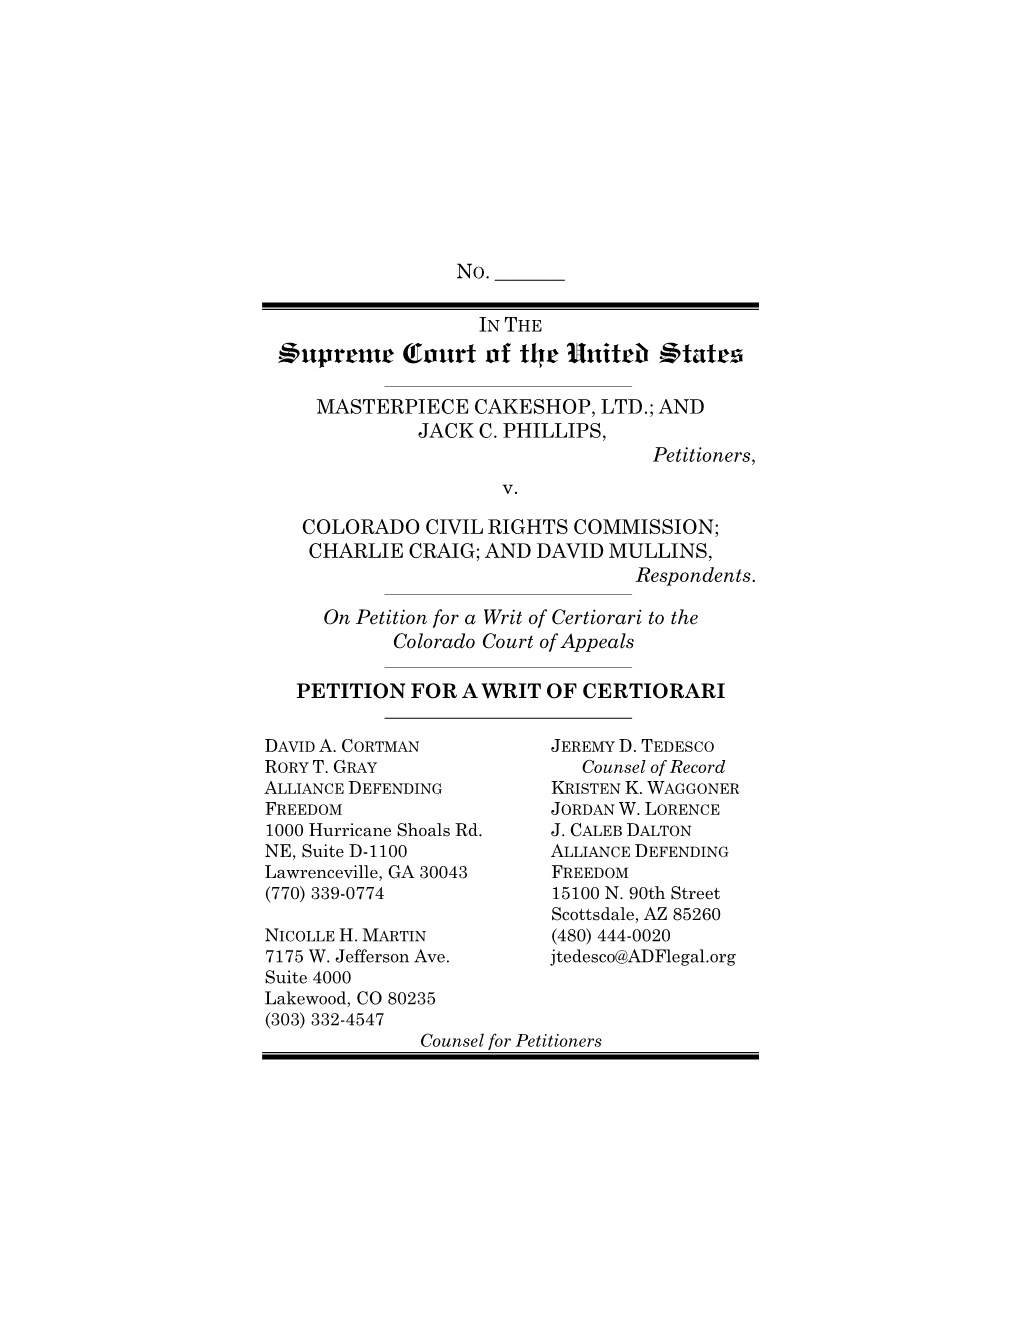 Petition for a Writ of Certiorari to the Colorado Court of Appeals